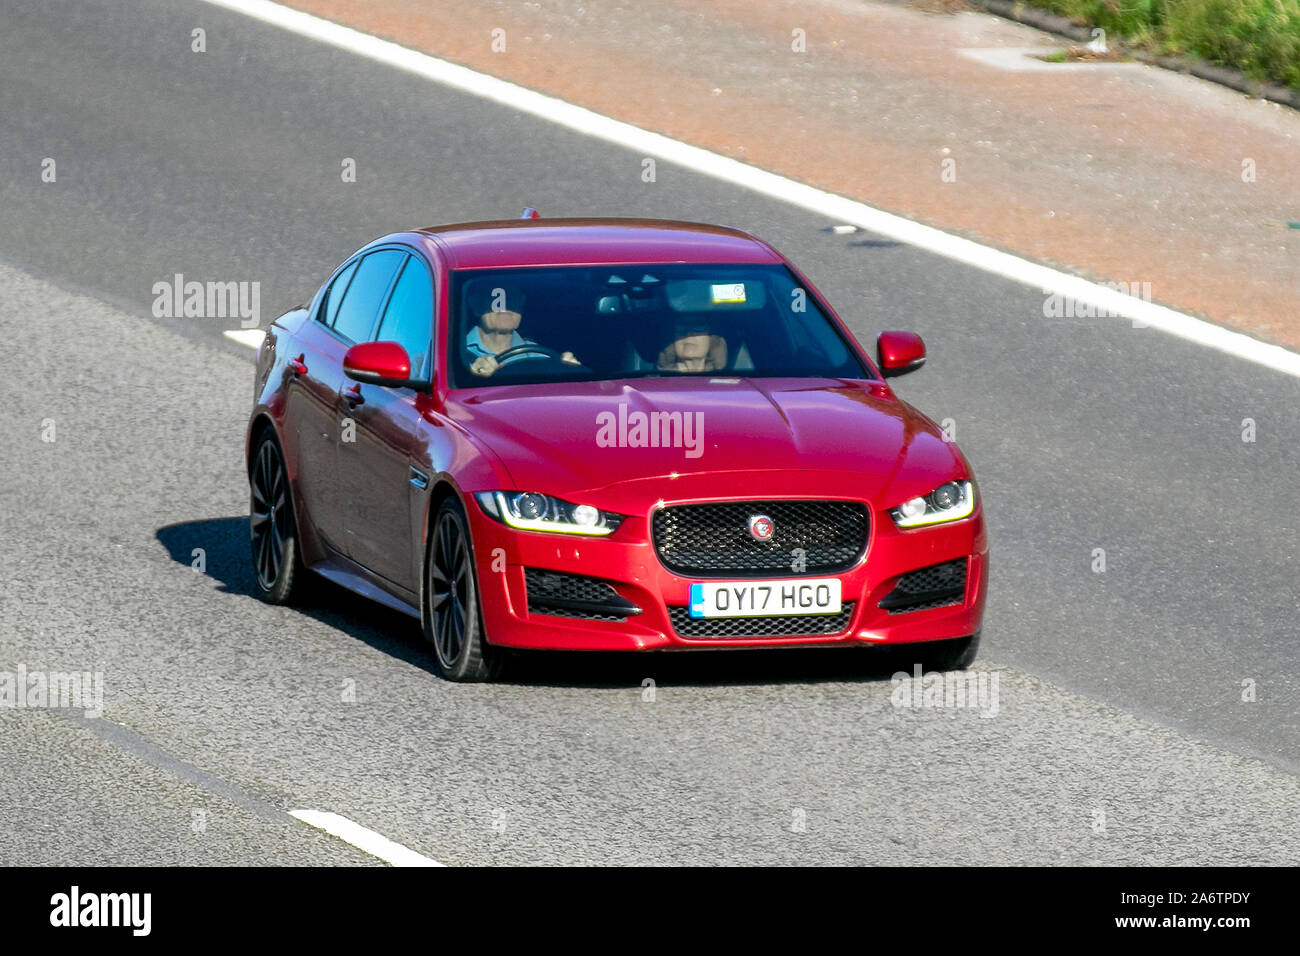 2017 red Jaguar XE R-Sport D Auto; UK Vehicular traffic, transport, modern vehicles, saloon cars, south-bound on the 3 lane M6 motorway highway. Stock Photo